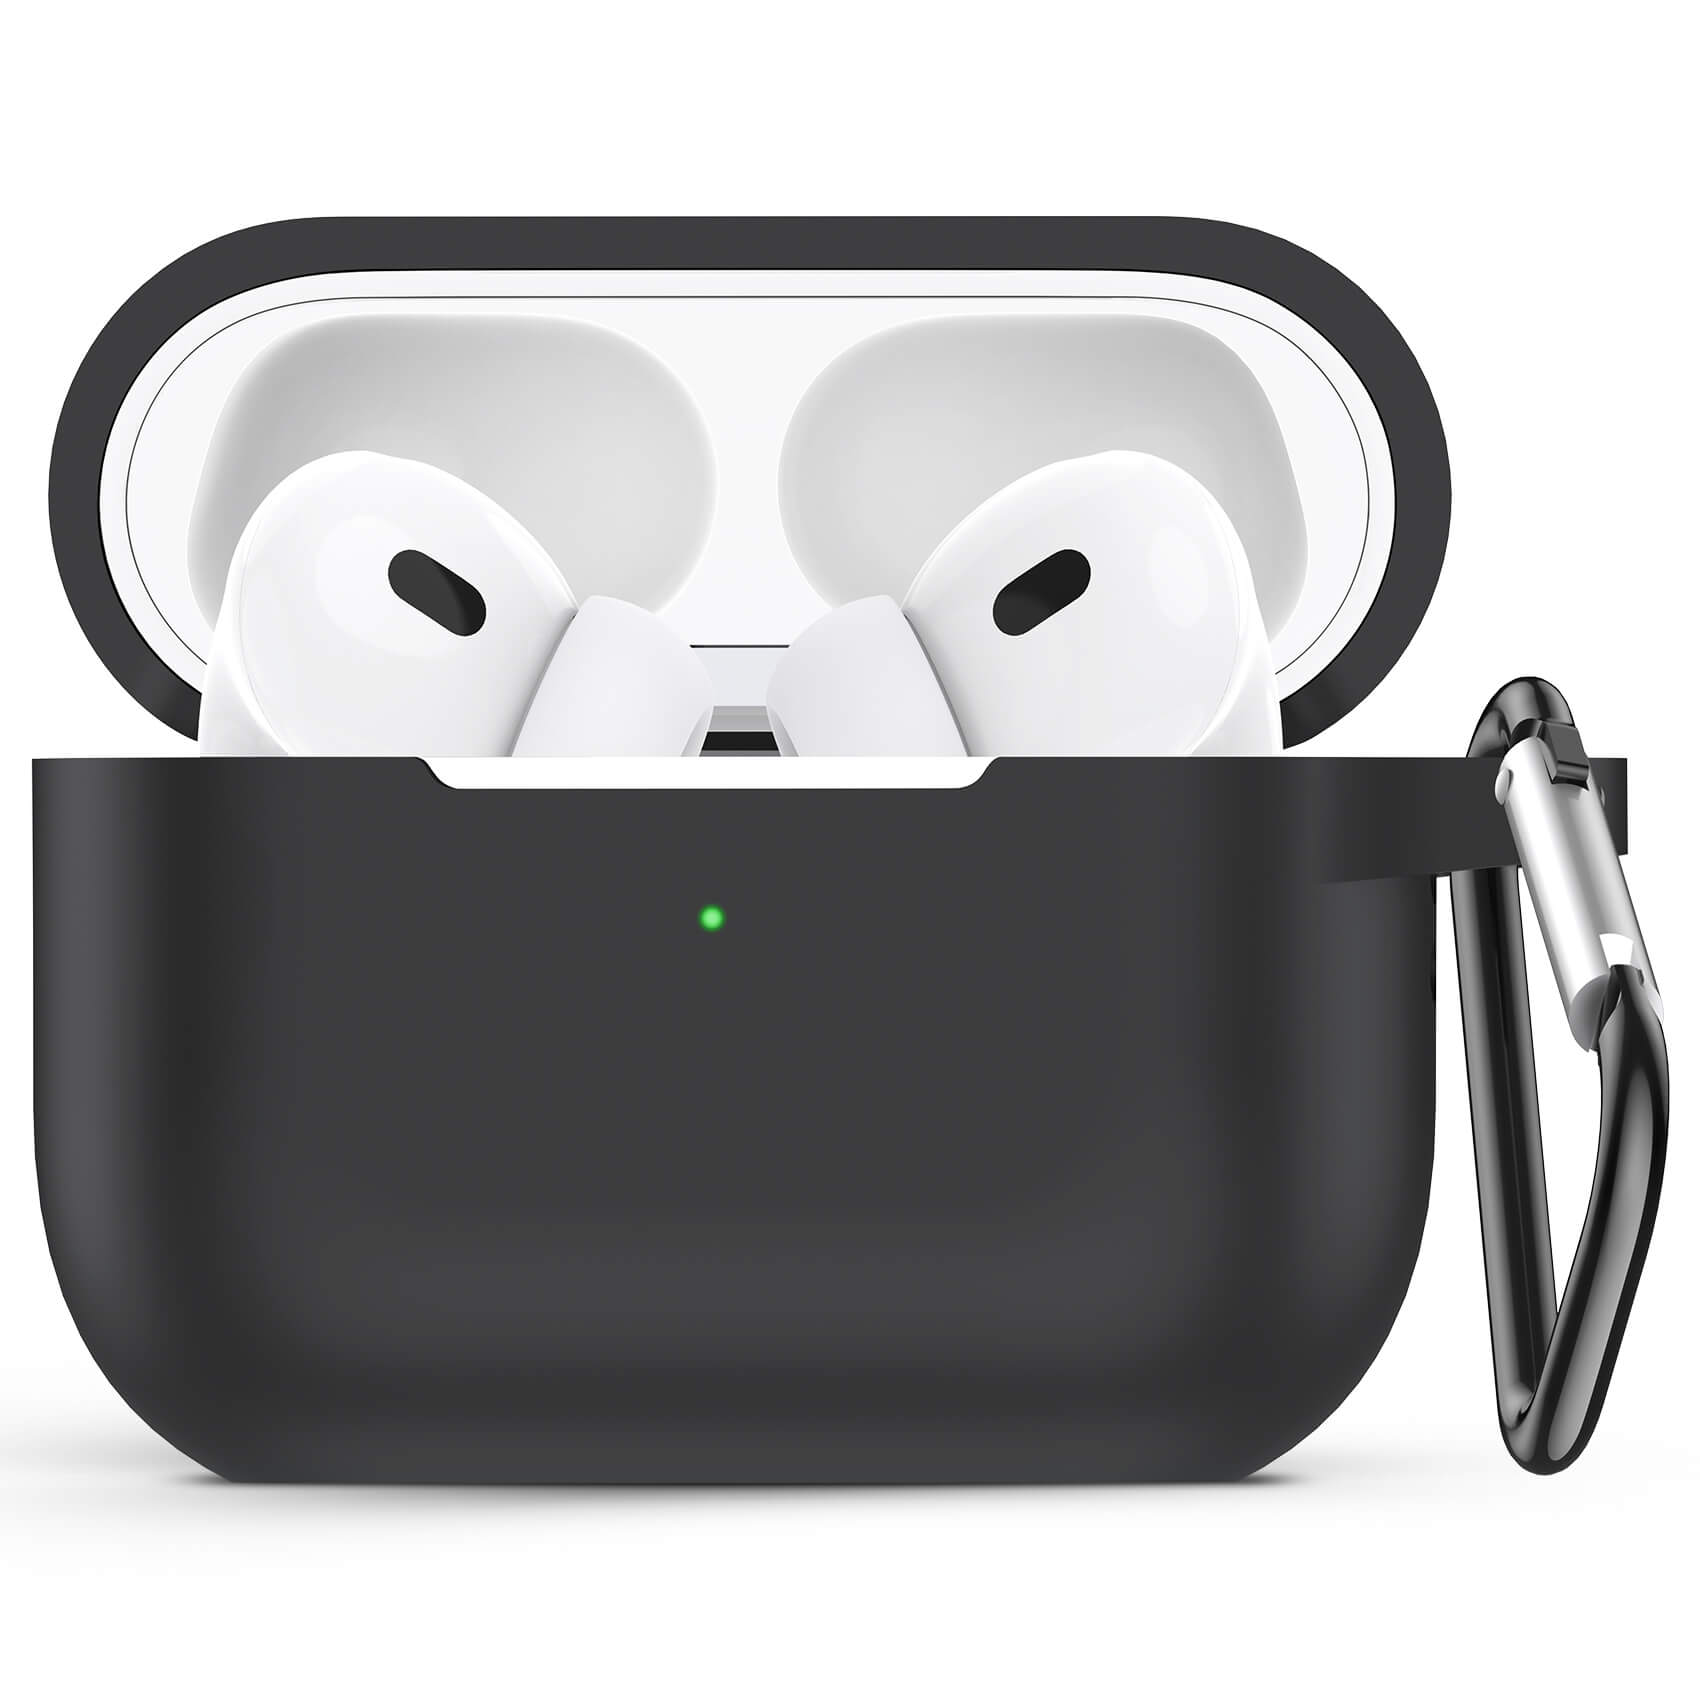 AirPods Pro ケース付き